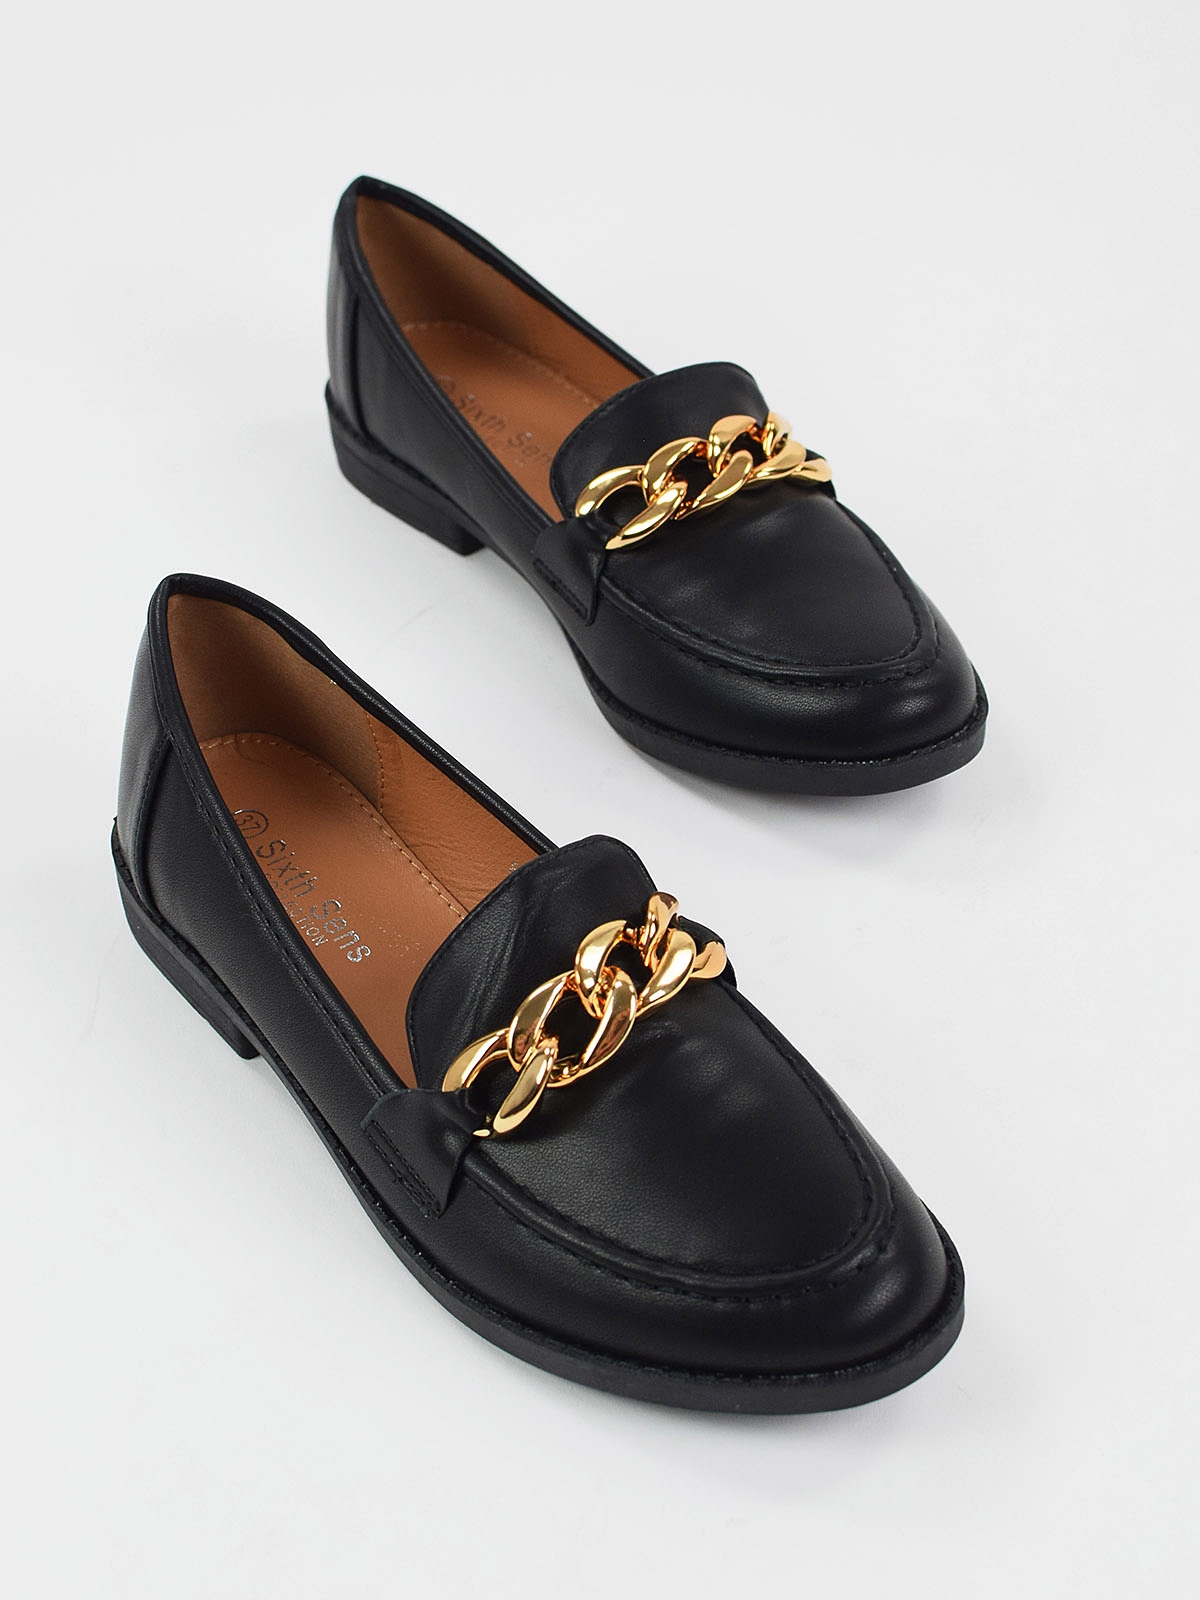 Gold color chain loafers in black